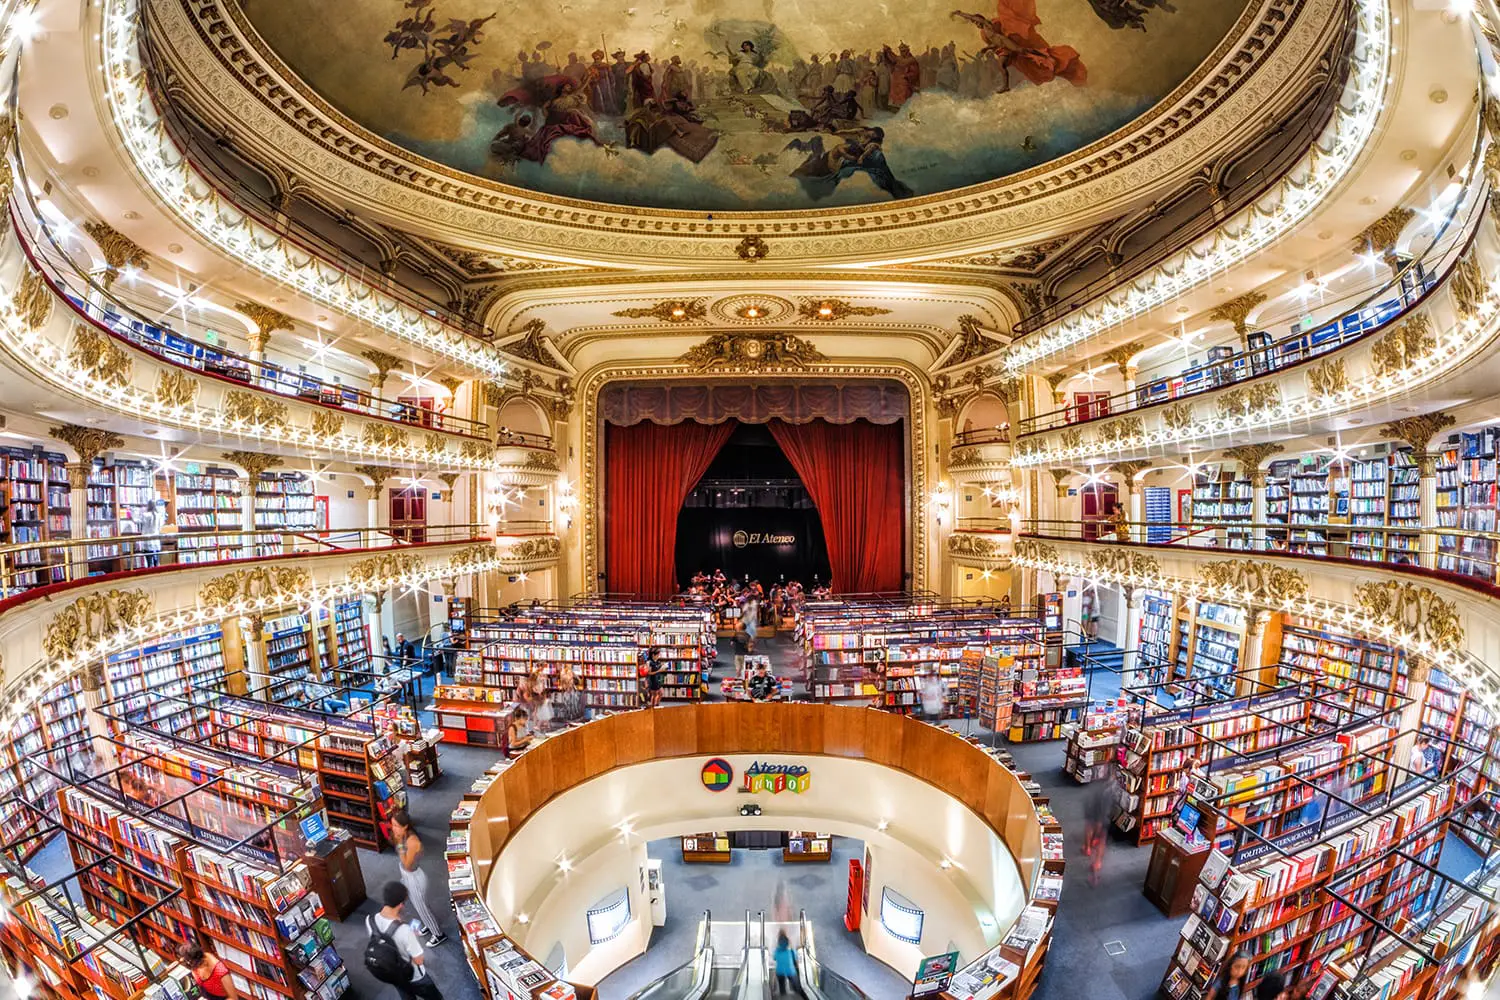 The famous El Ateneo Grand Splendid, a bookshop set in a 100-year-old theater in Buenos Aires, Argentina.